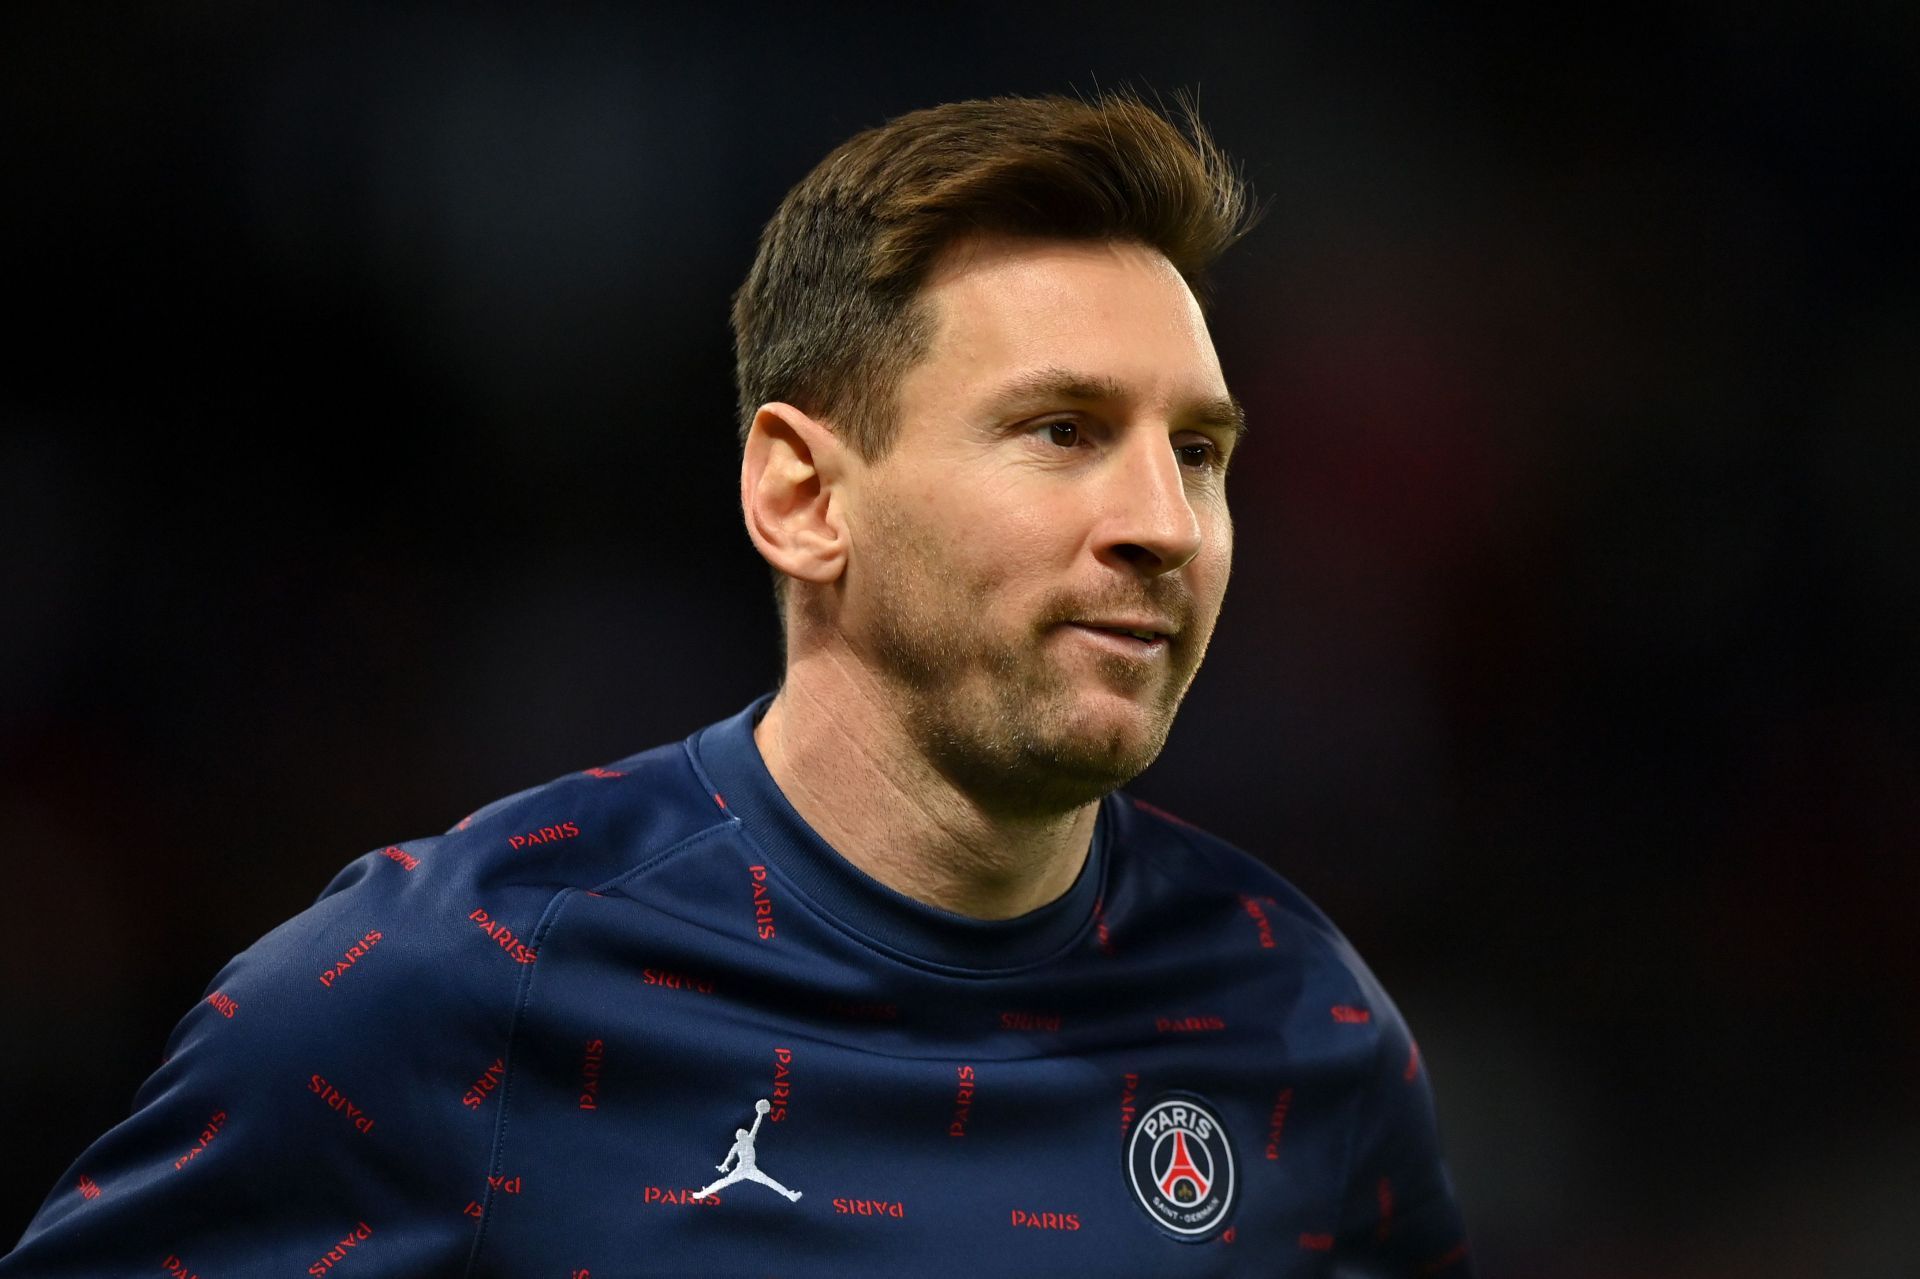 Paris Saint-Germain attacker Lionel Messi has recovered from his injury setback